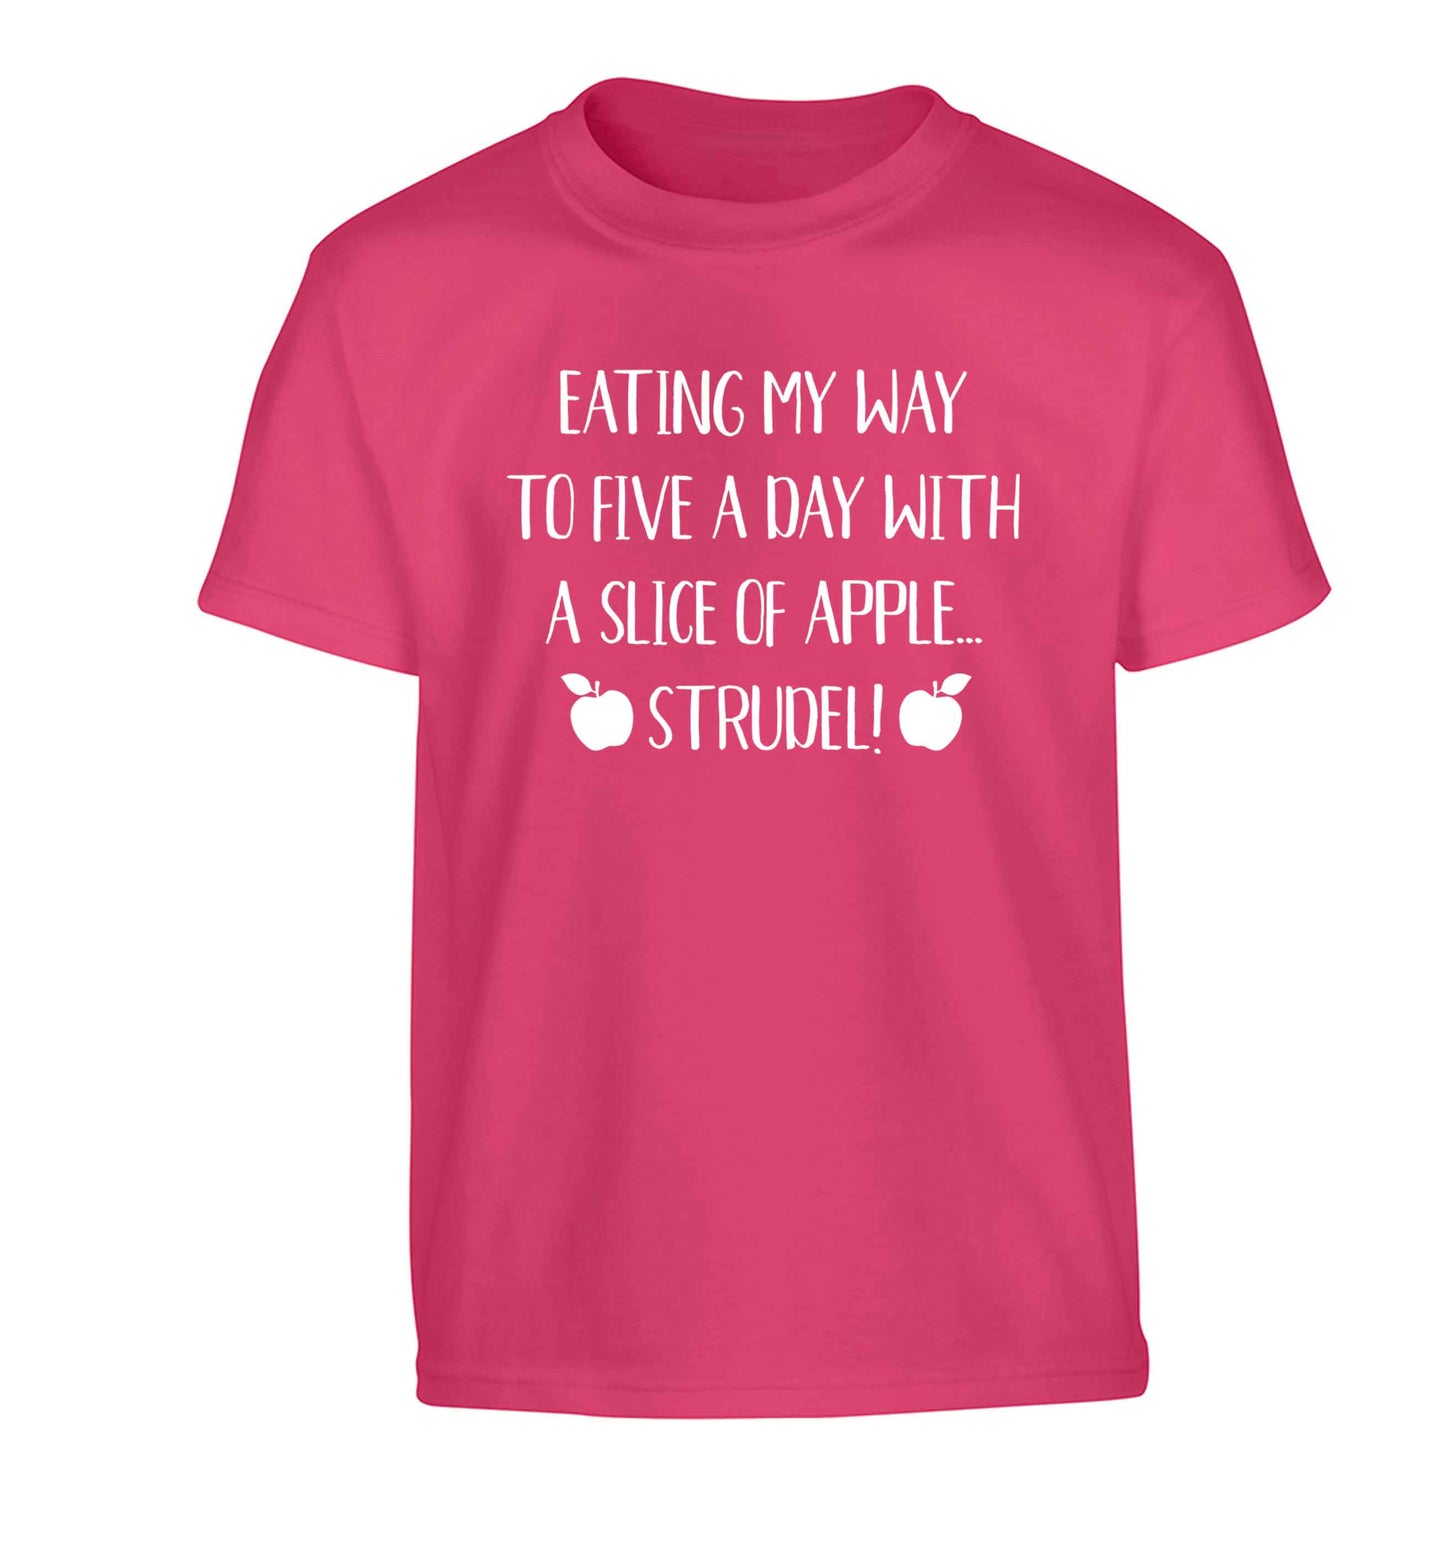 Eating my way to five a day with a slice of apple strudel Children's pink Tshirt 12-13 Years